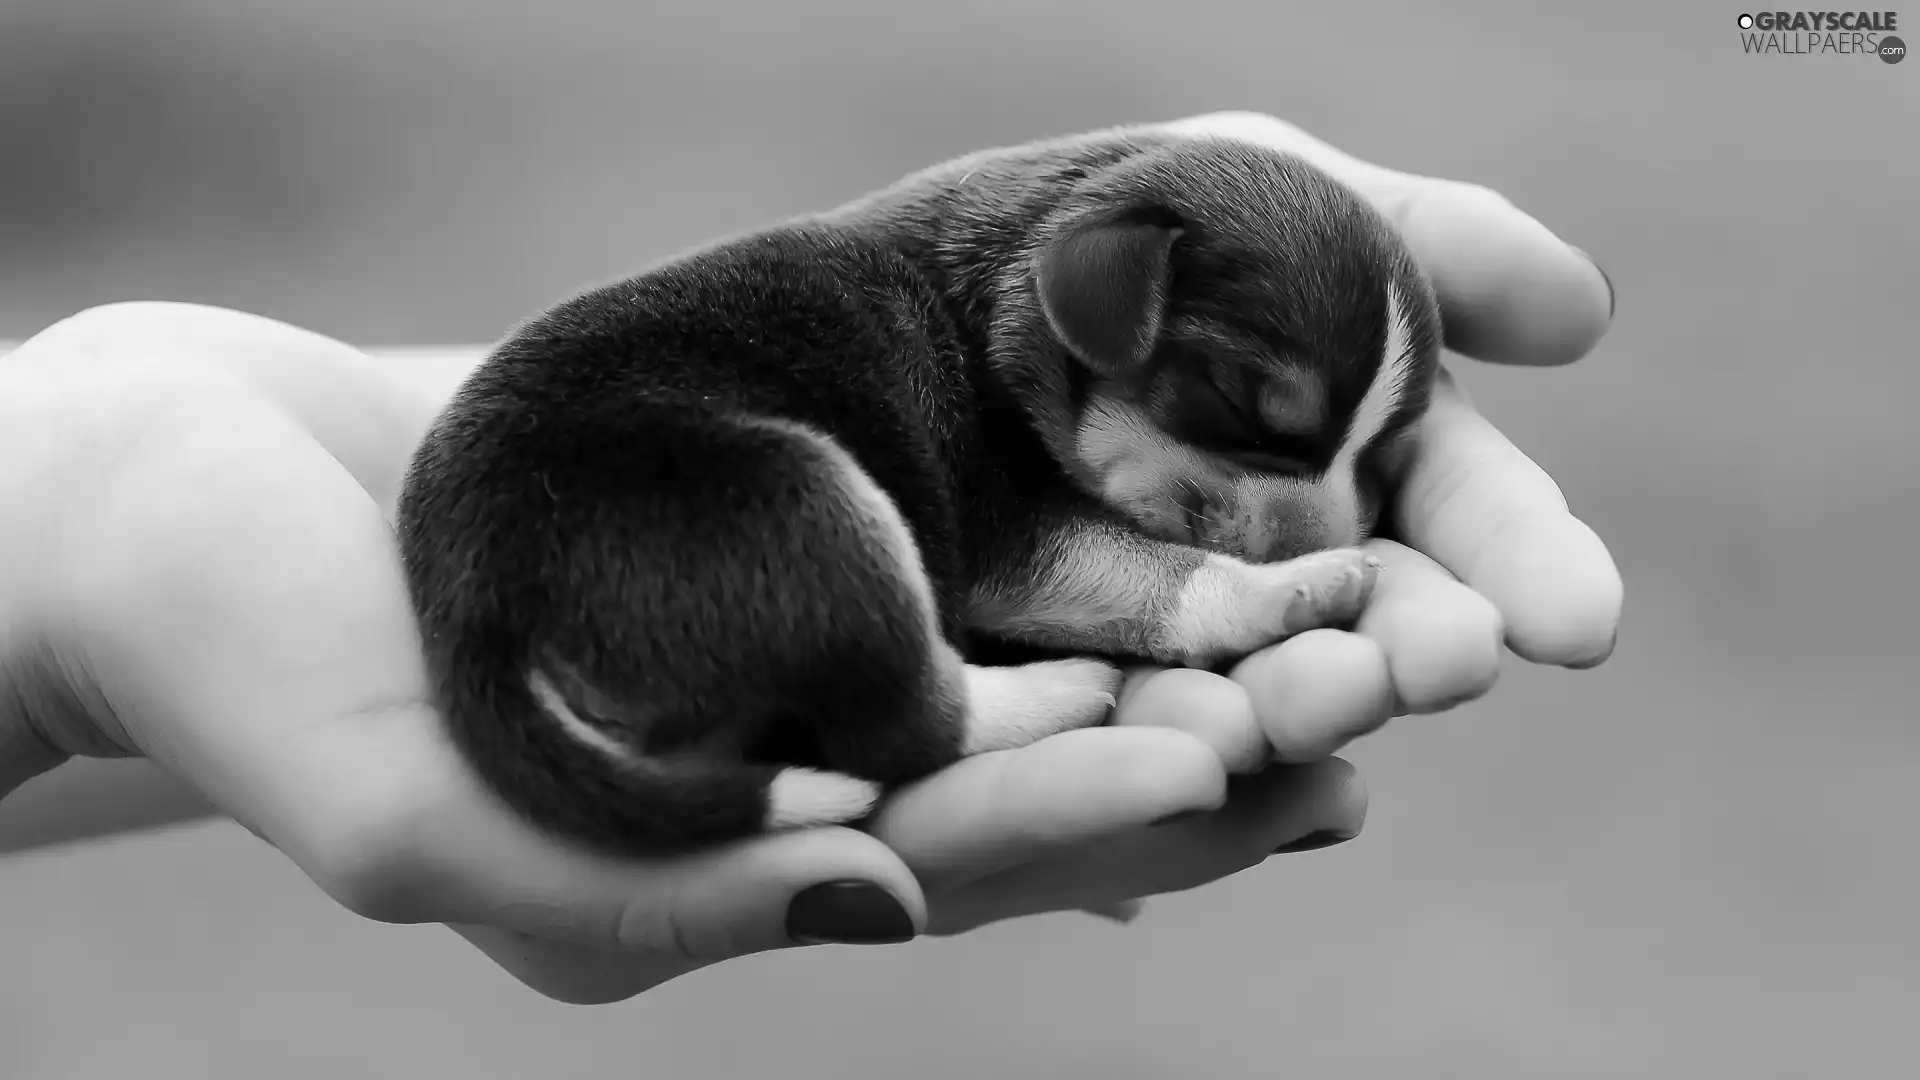 hands, small, doggy